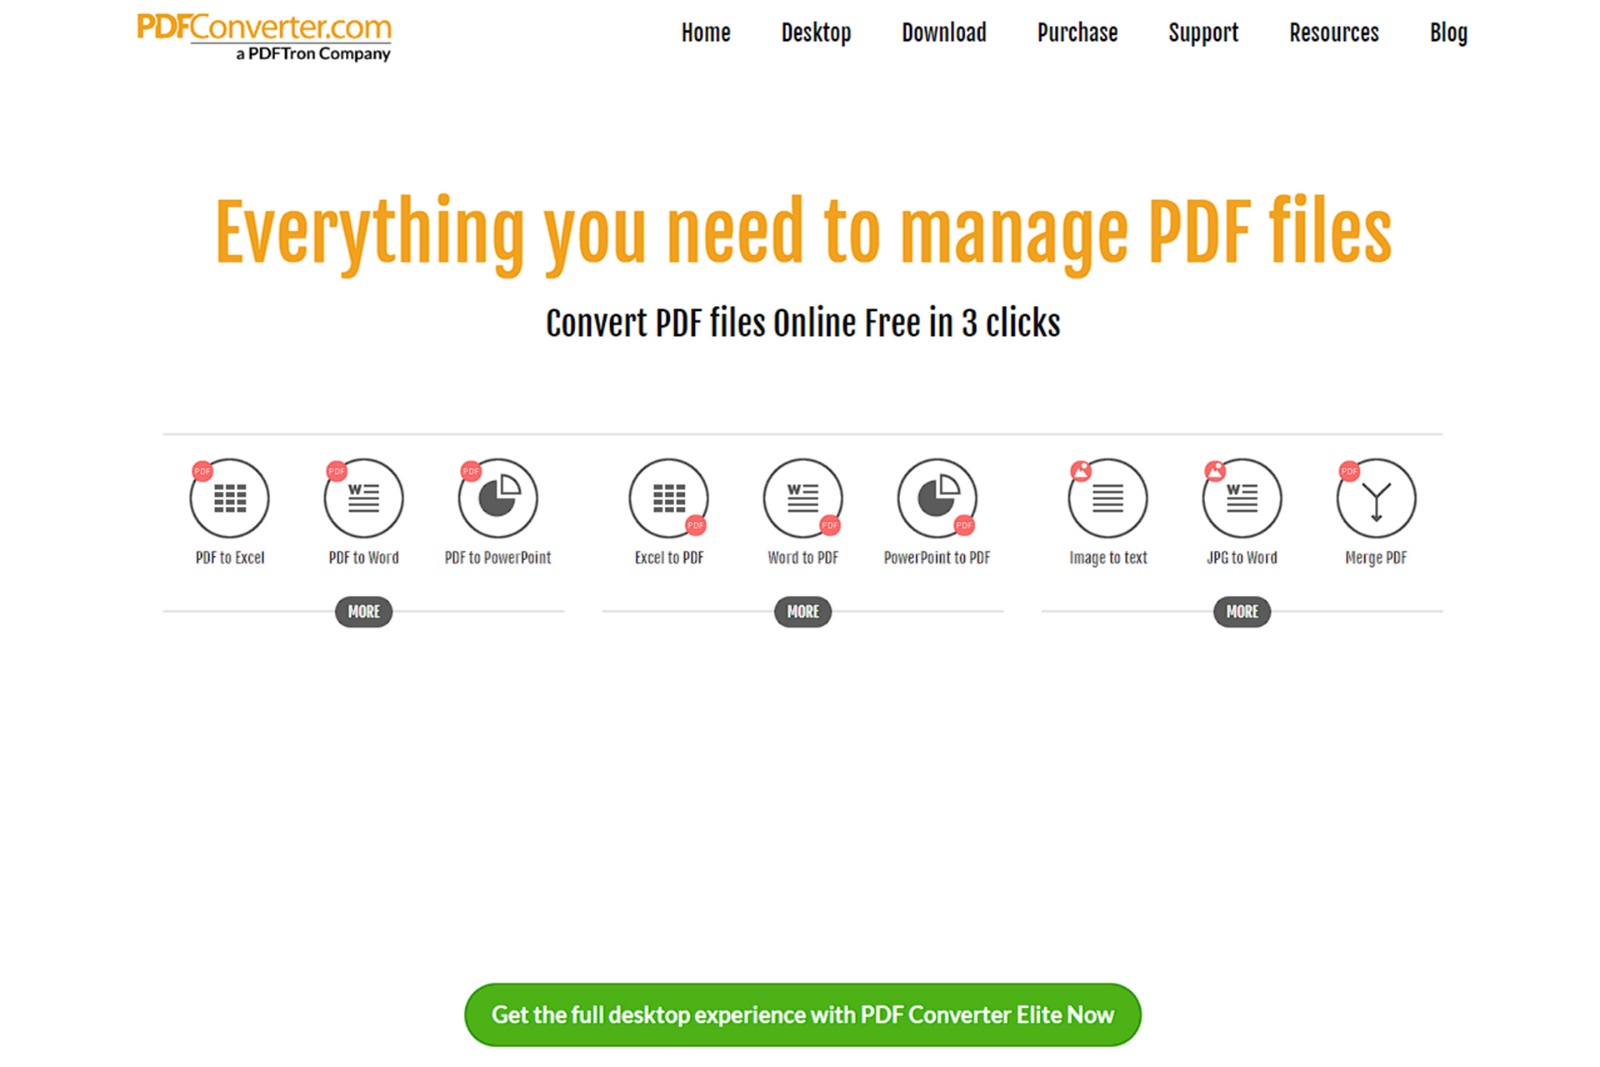 The initial page of a site for converting PDF files to different formats